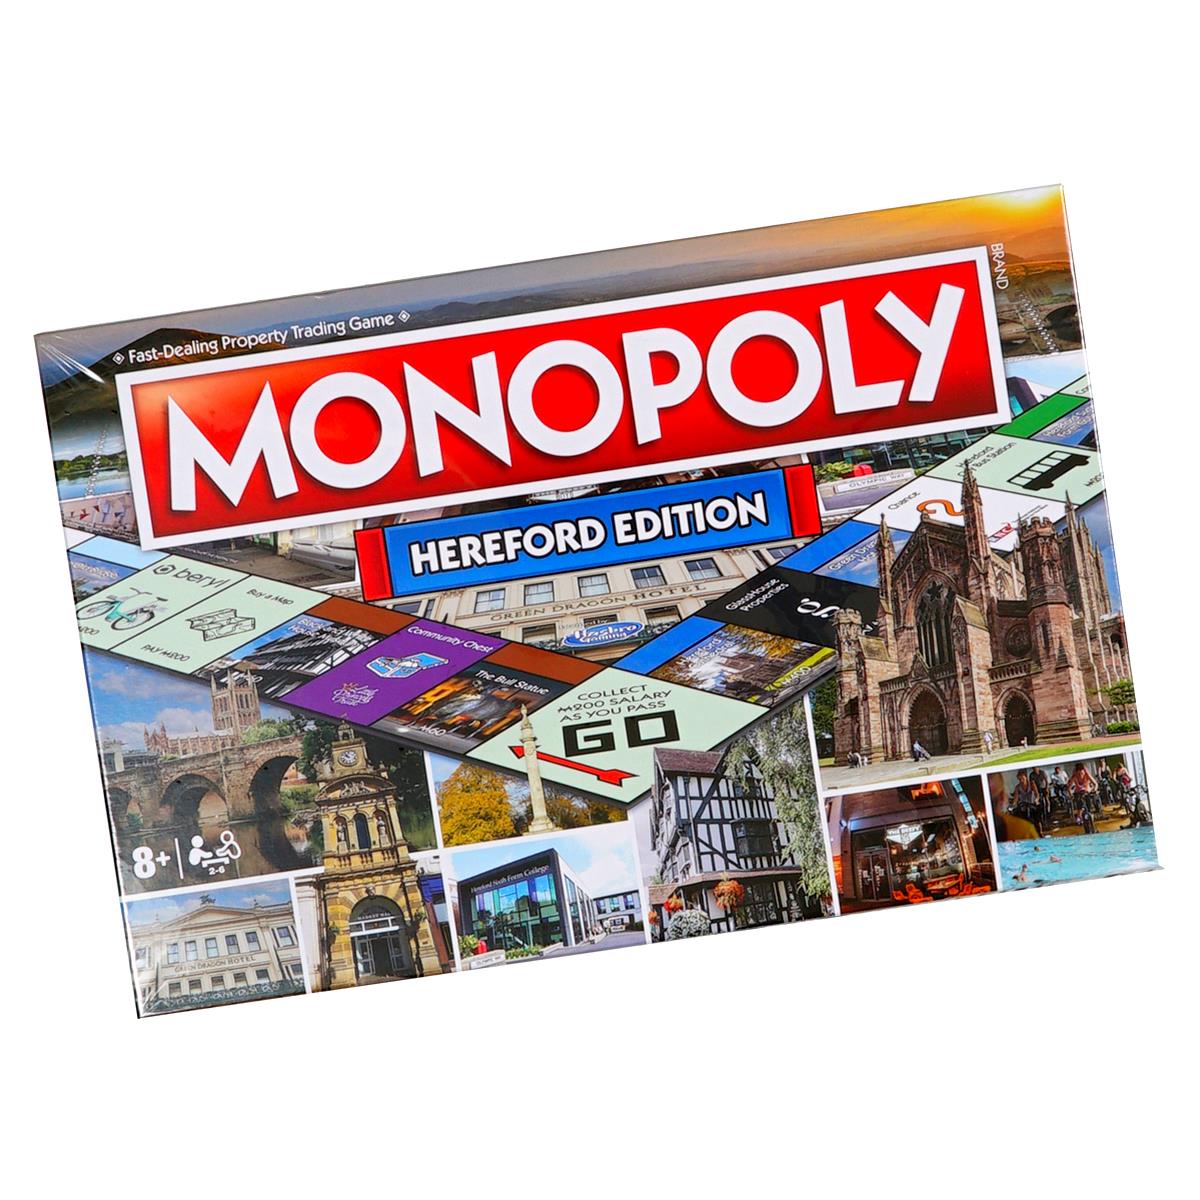 What is Hereford's trade name in the Hereford Monopoly board game?